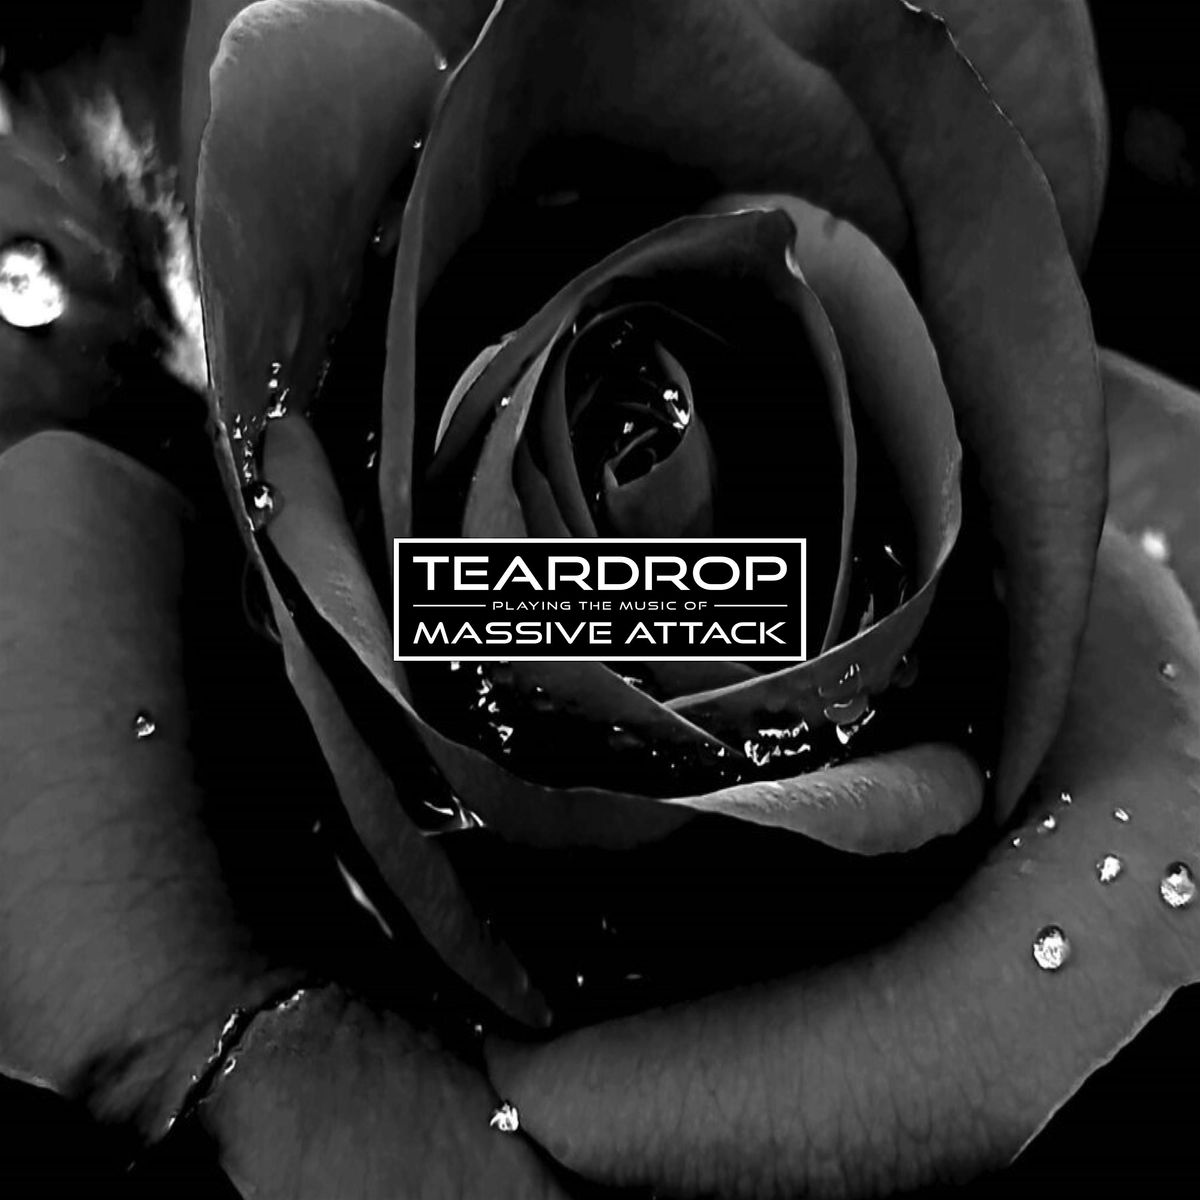 Teardrop play the music of Massive Attack